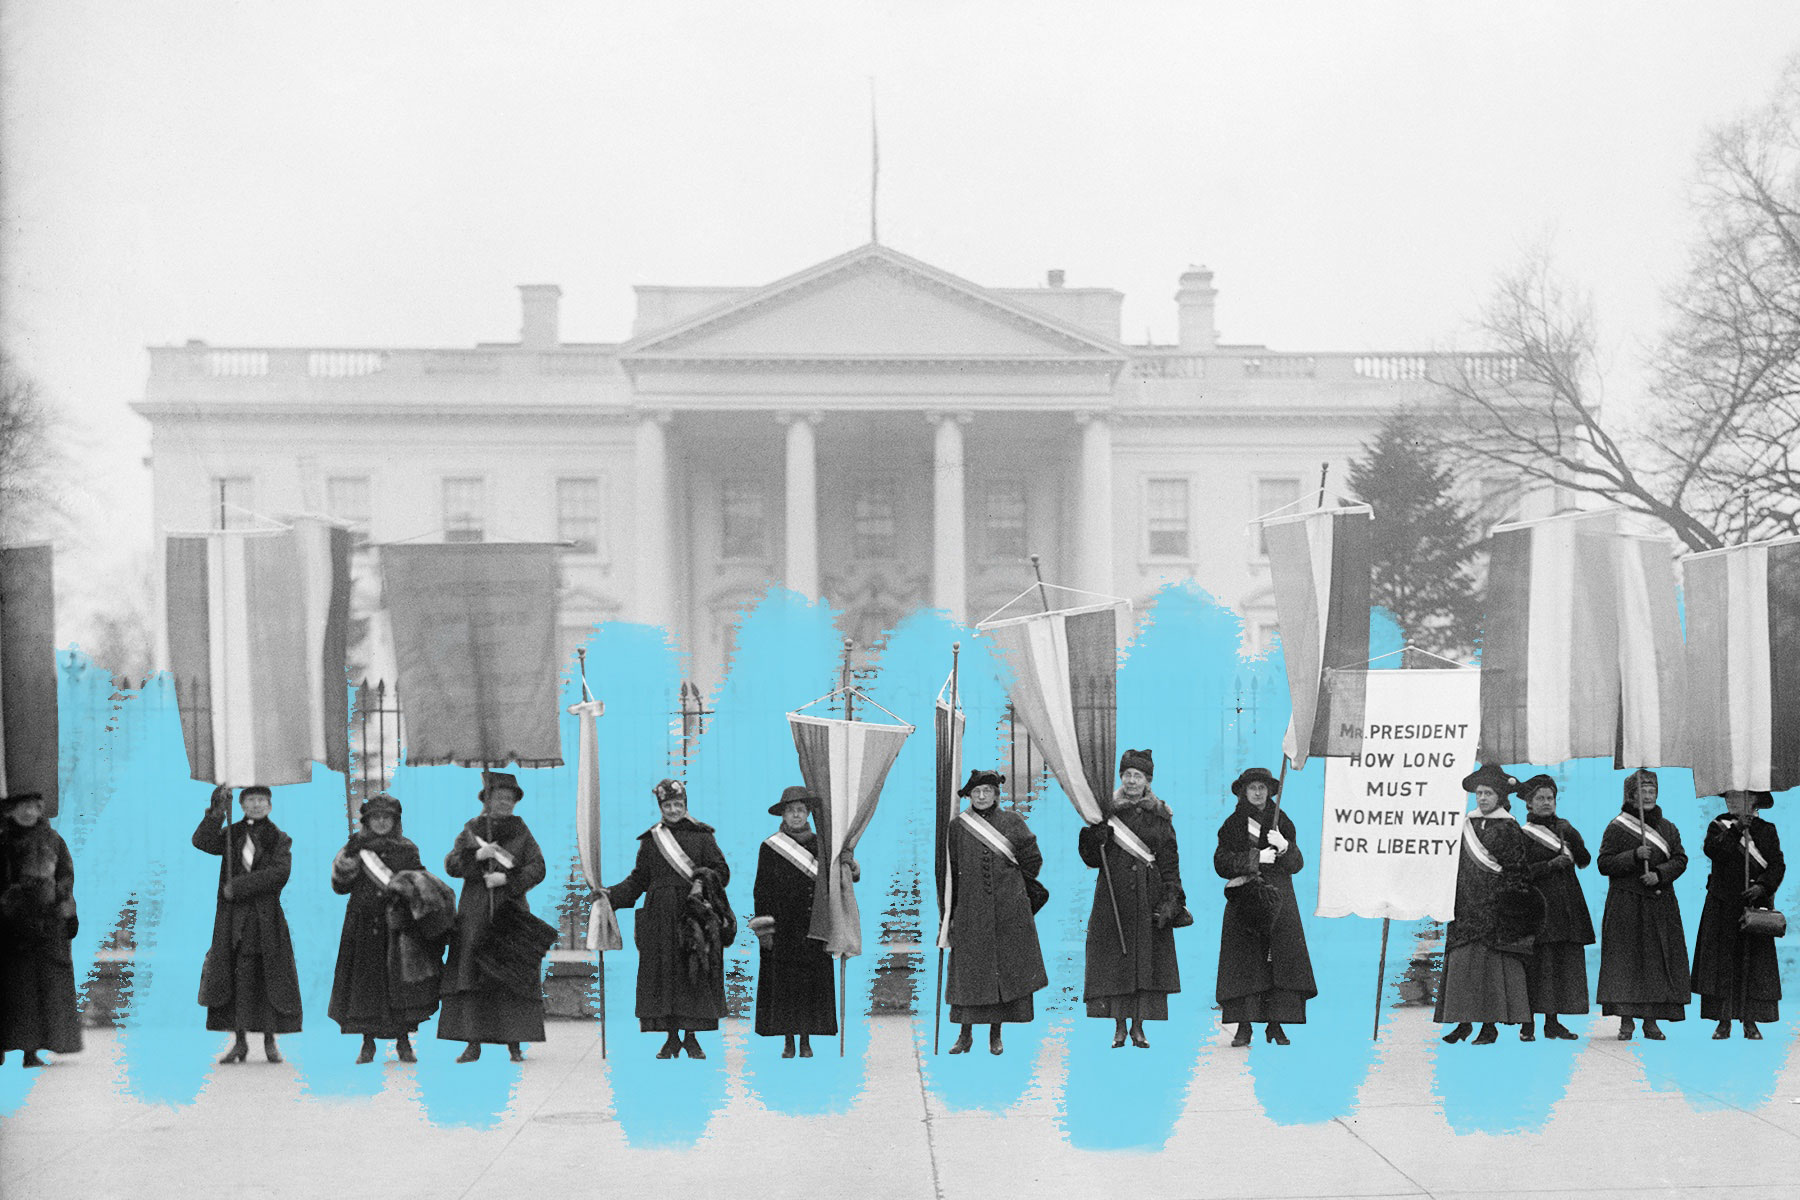 Women's suffrage protest